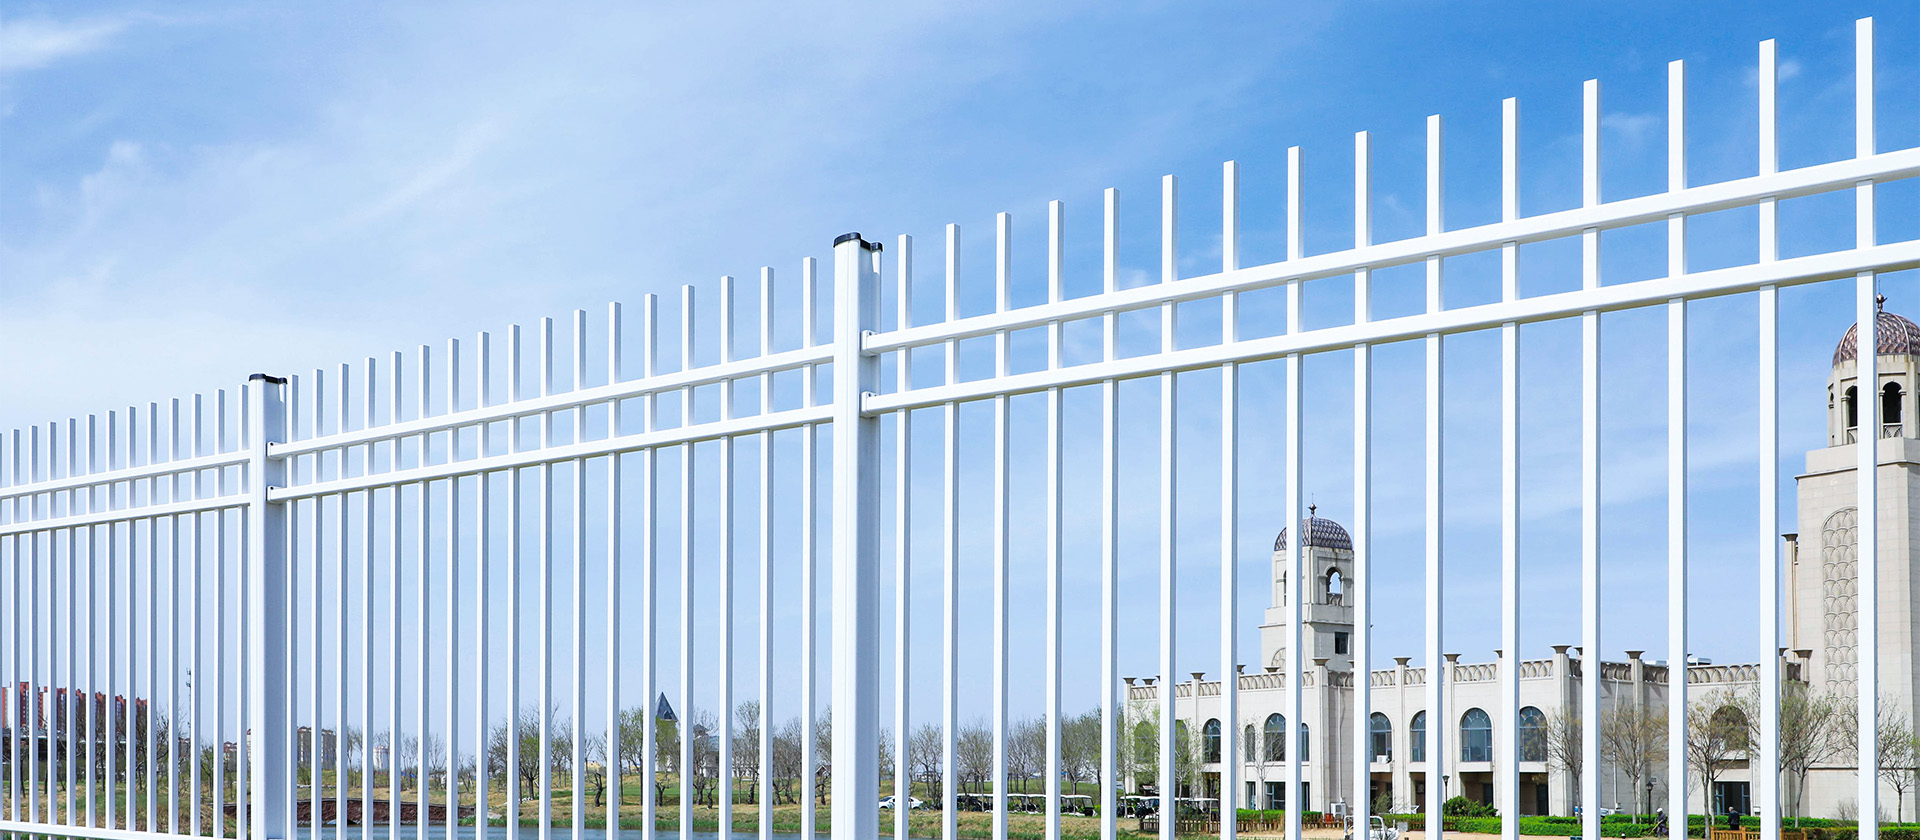 Panel is becoming more and more popular fence 
for private residence, gardens, parks, sport area and industrial use.